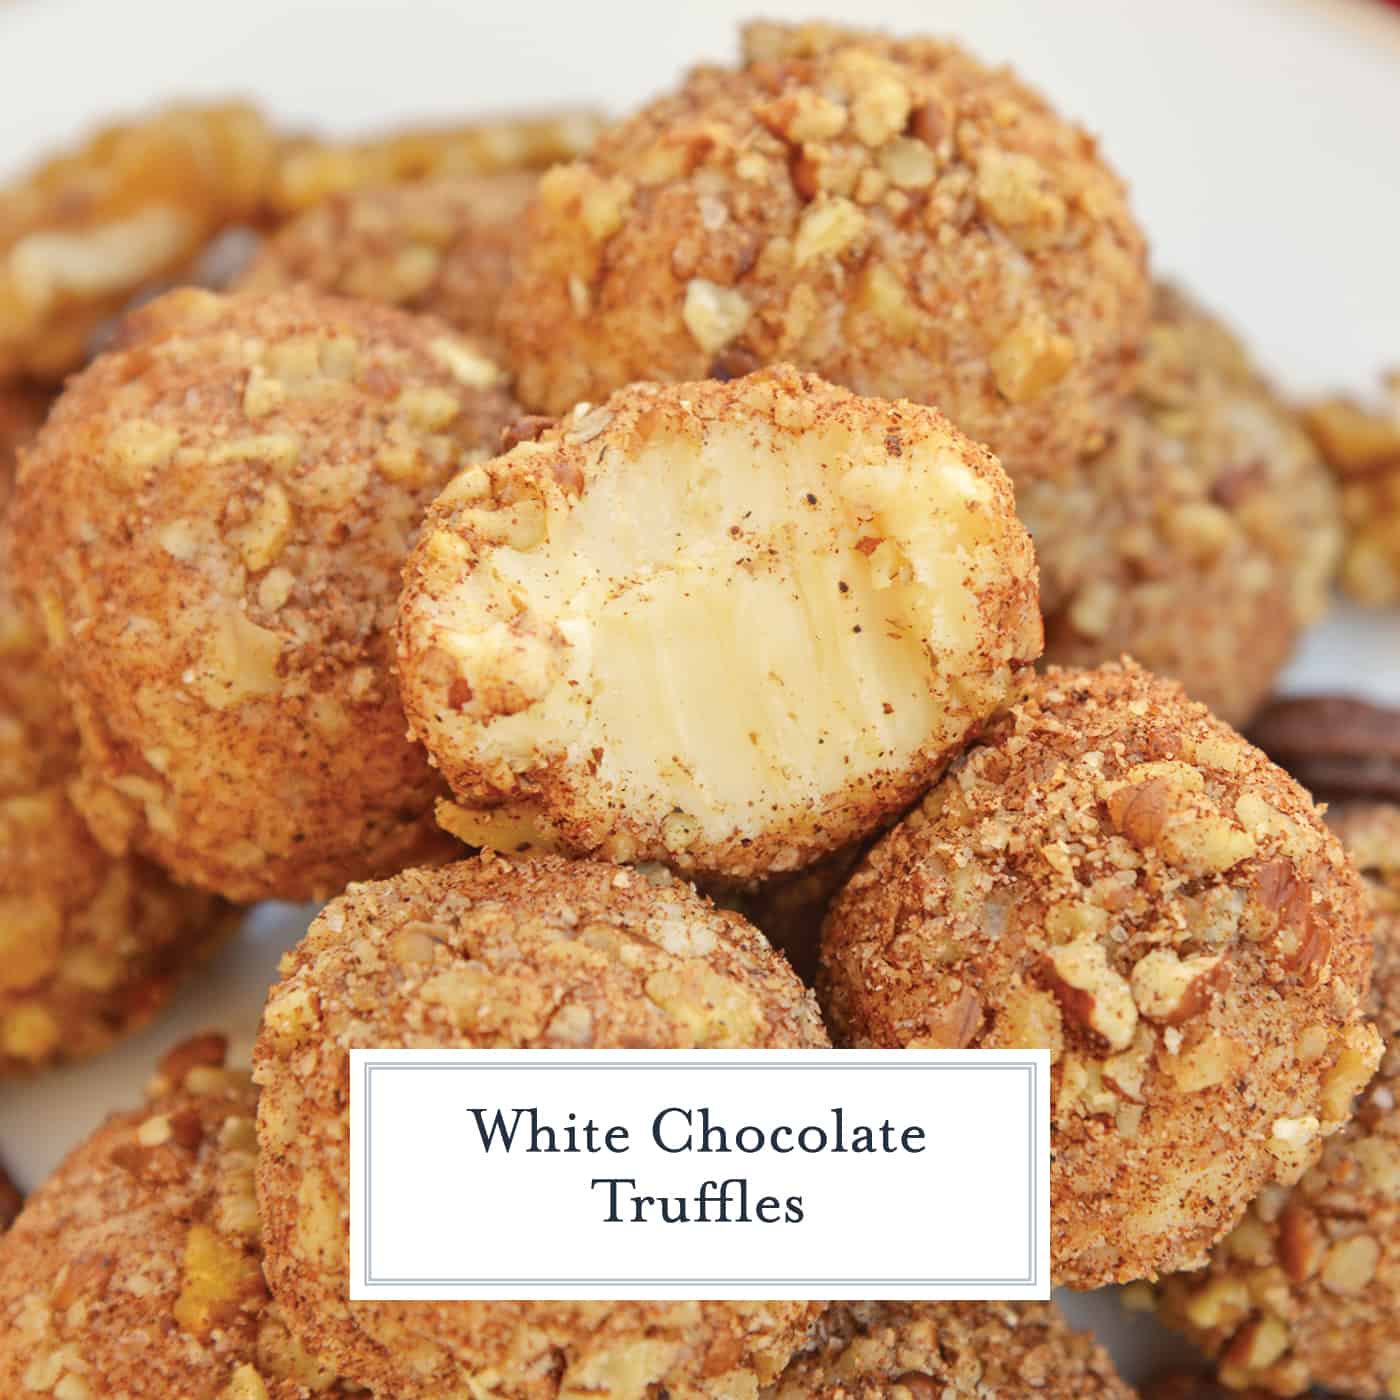 White Chocolate Truffles are an easy truffle recipe made with just a handful of ingredients. Creamy white chocolate rolled in toasted pecans, cinnamon and nutmeg. #whitechocolatetruffles #easytrufflerecipe www.savoryexperiments.com 